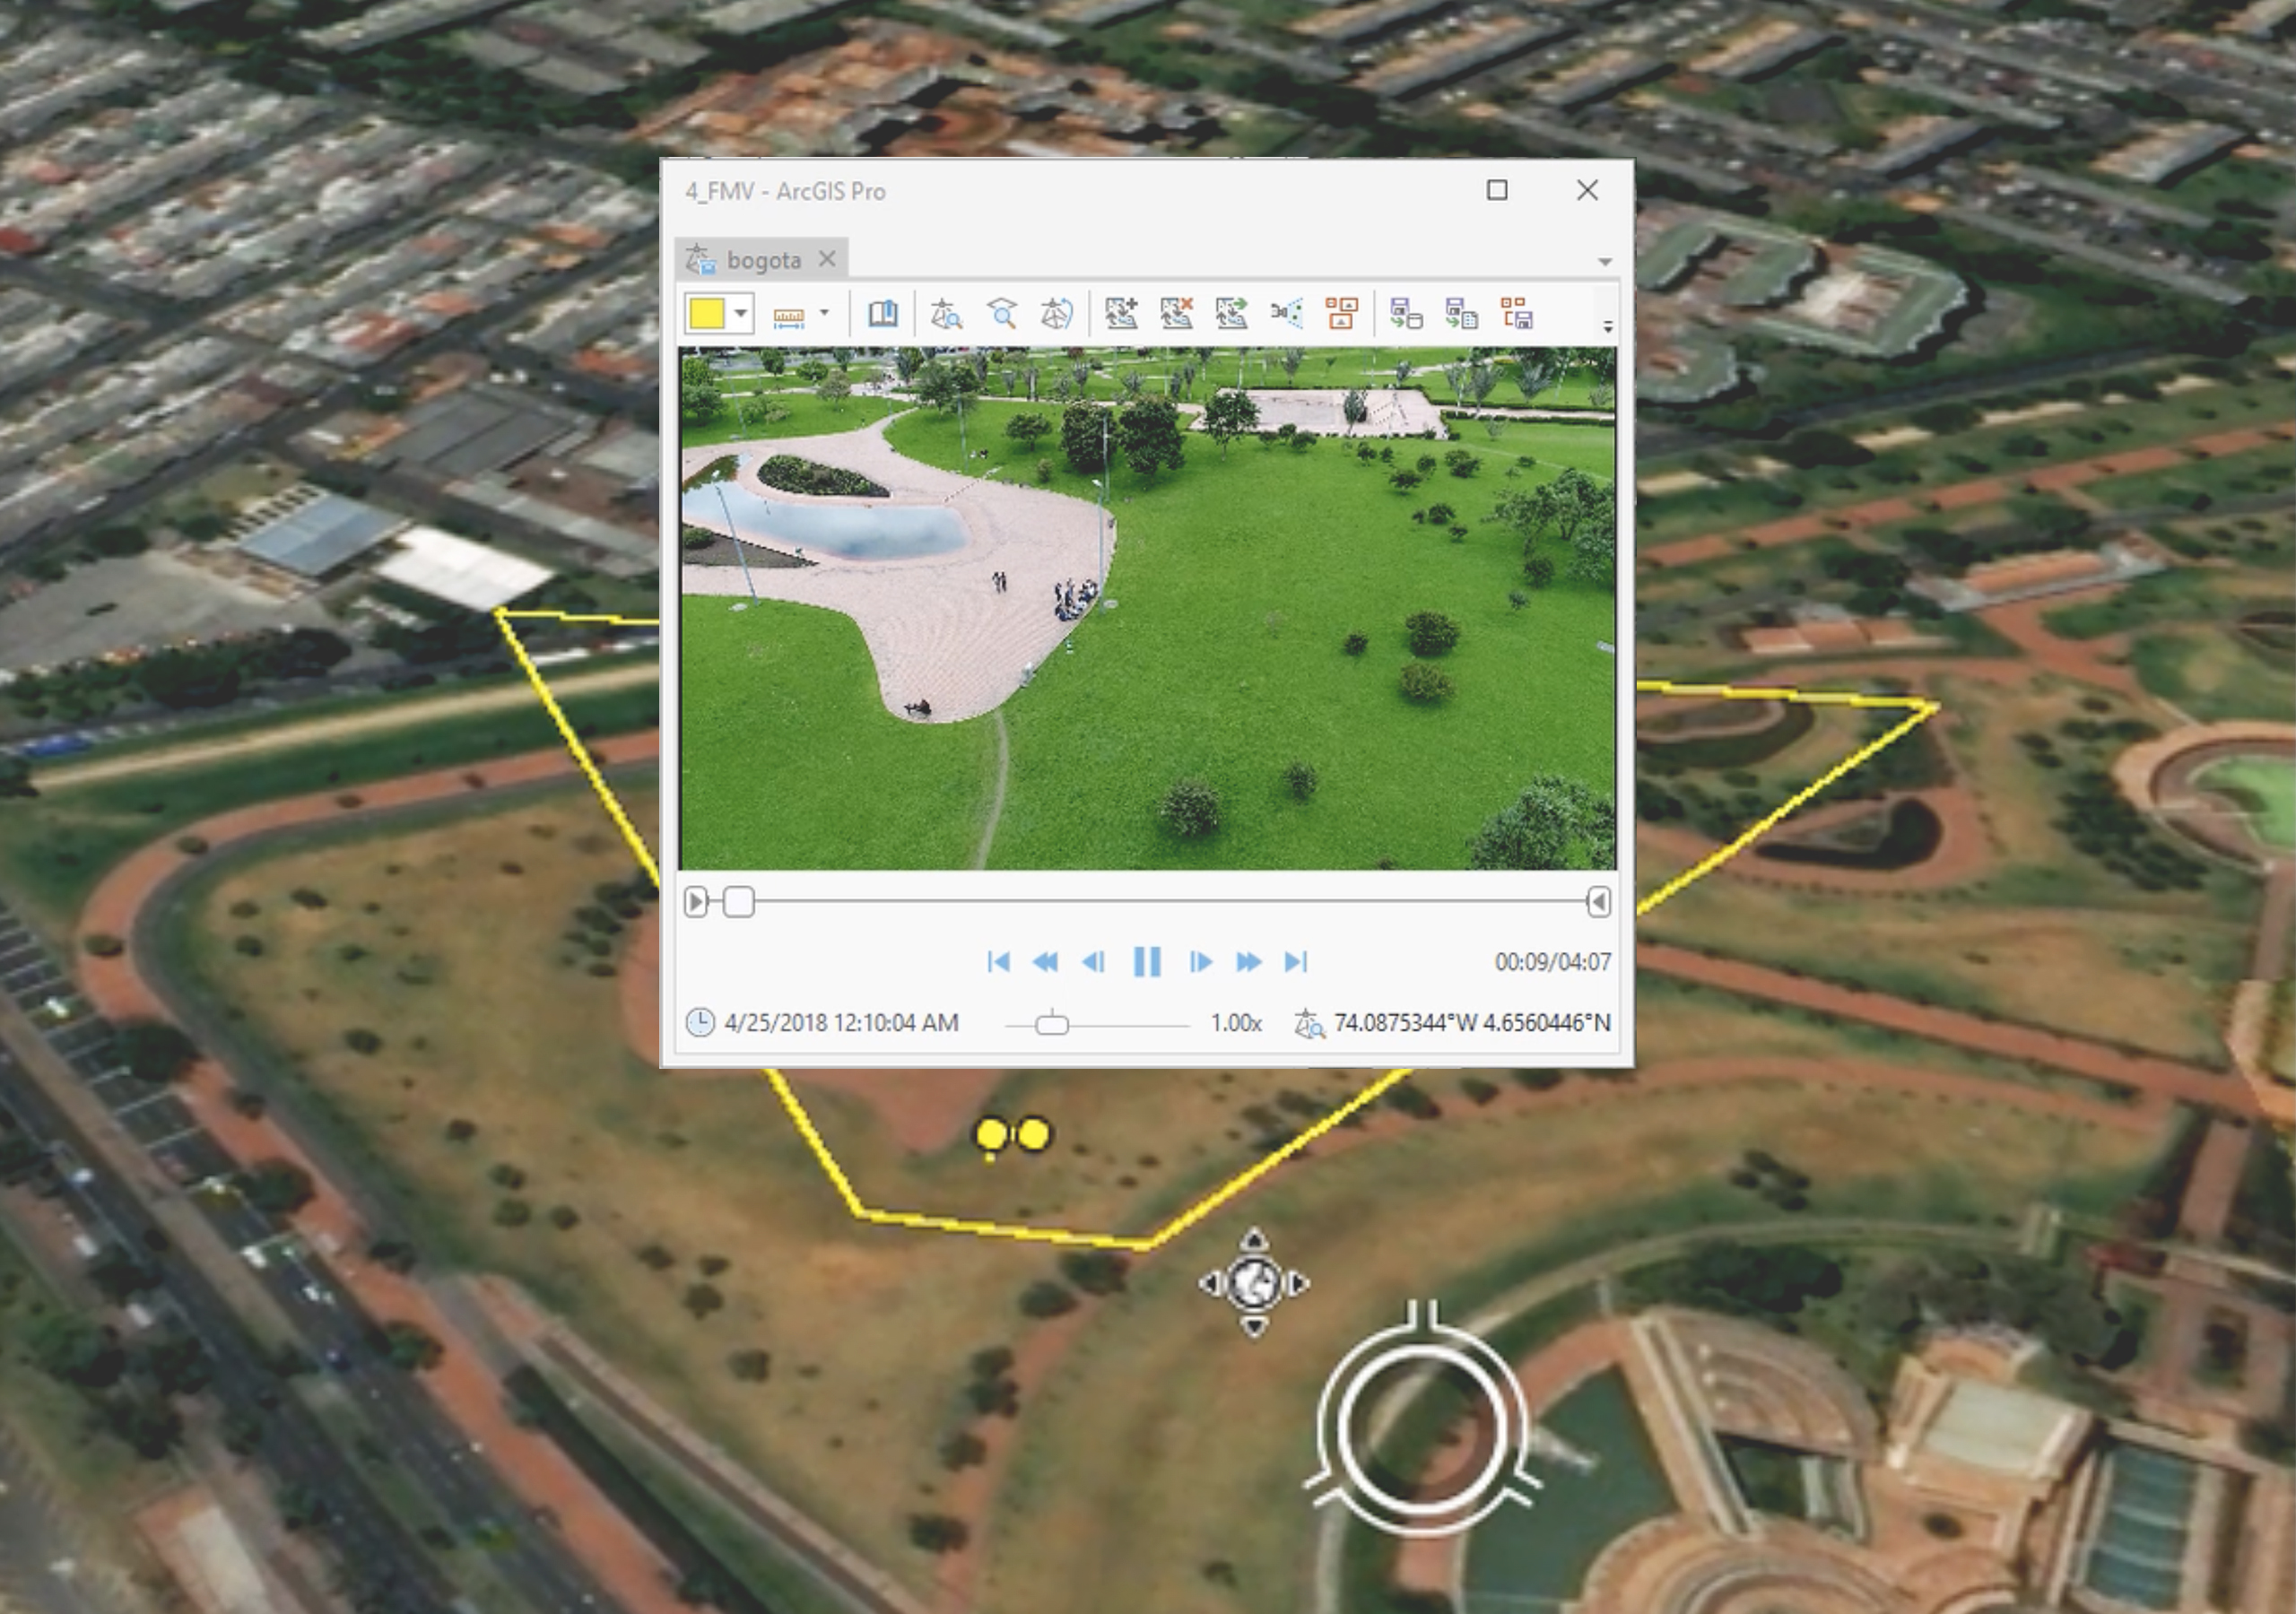 A video player window shows drone footage of people in a park, with a drone flight plan map in the background